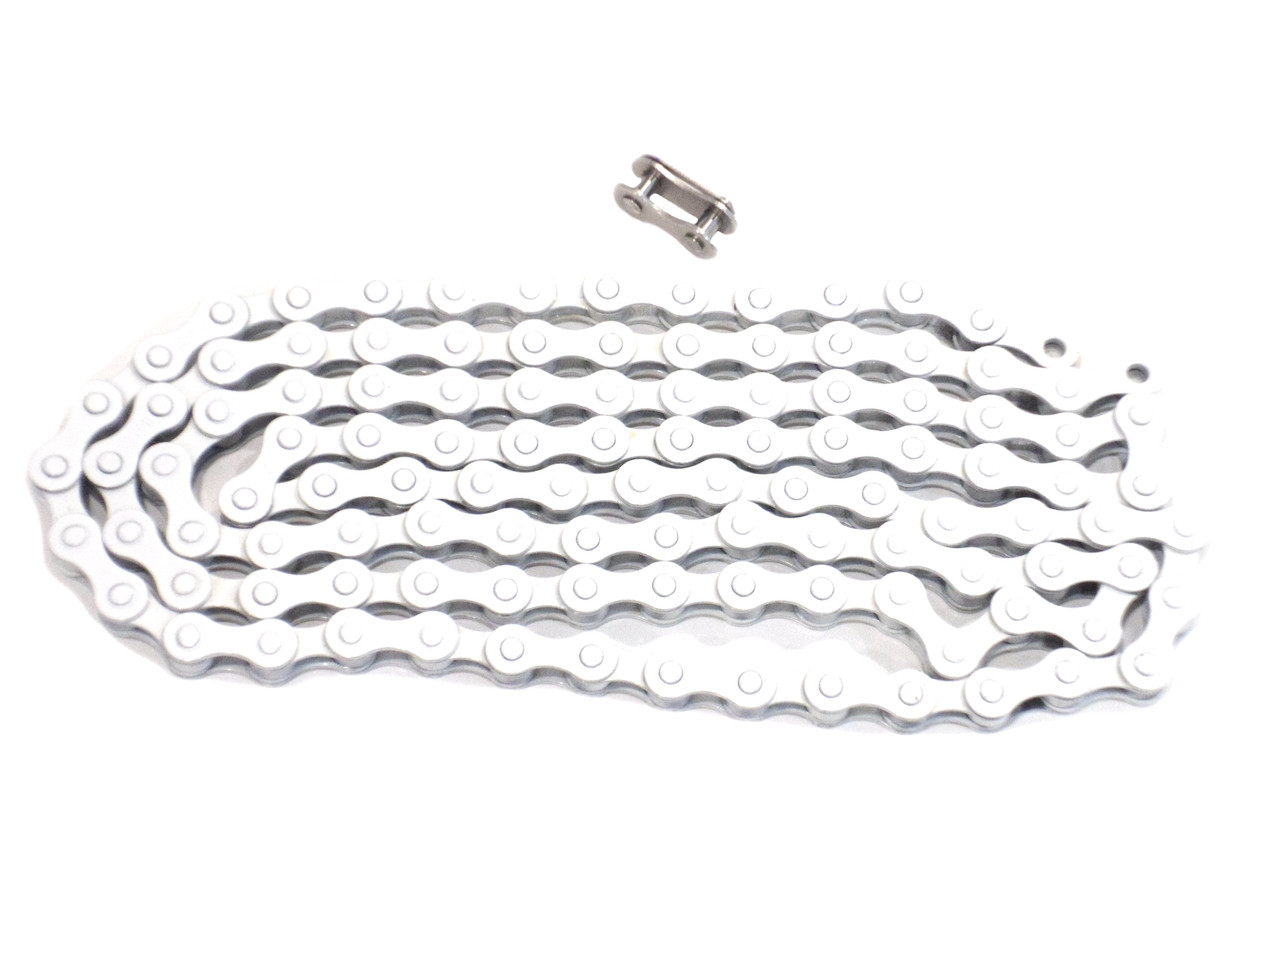 KMC 410H 112 SILV Single Speed Bicycle Chain 1/2×1/8 links 